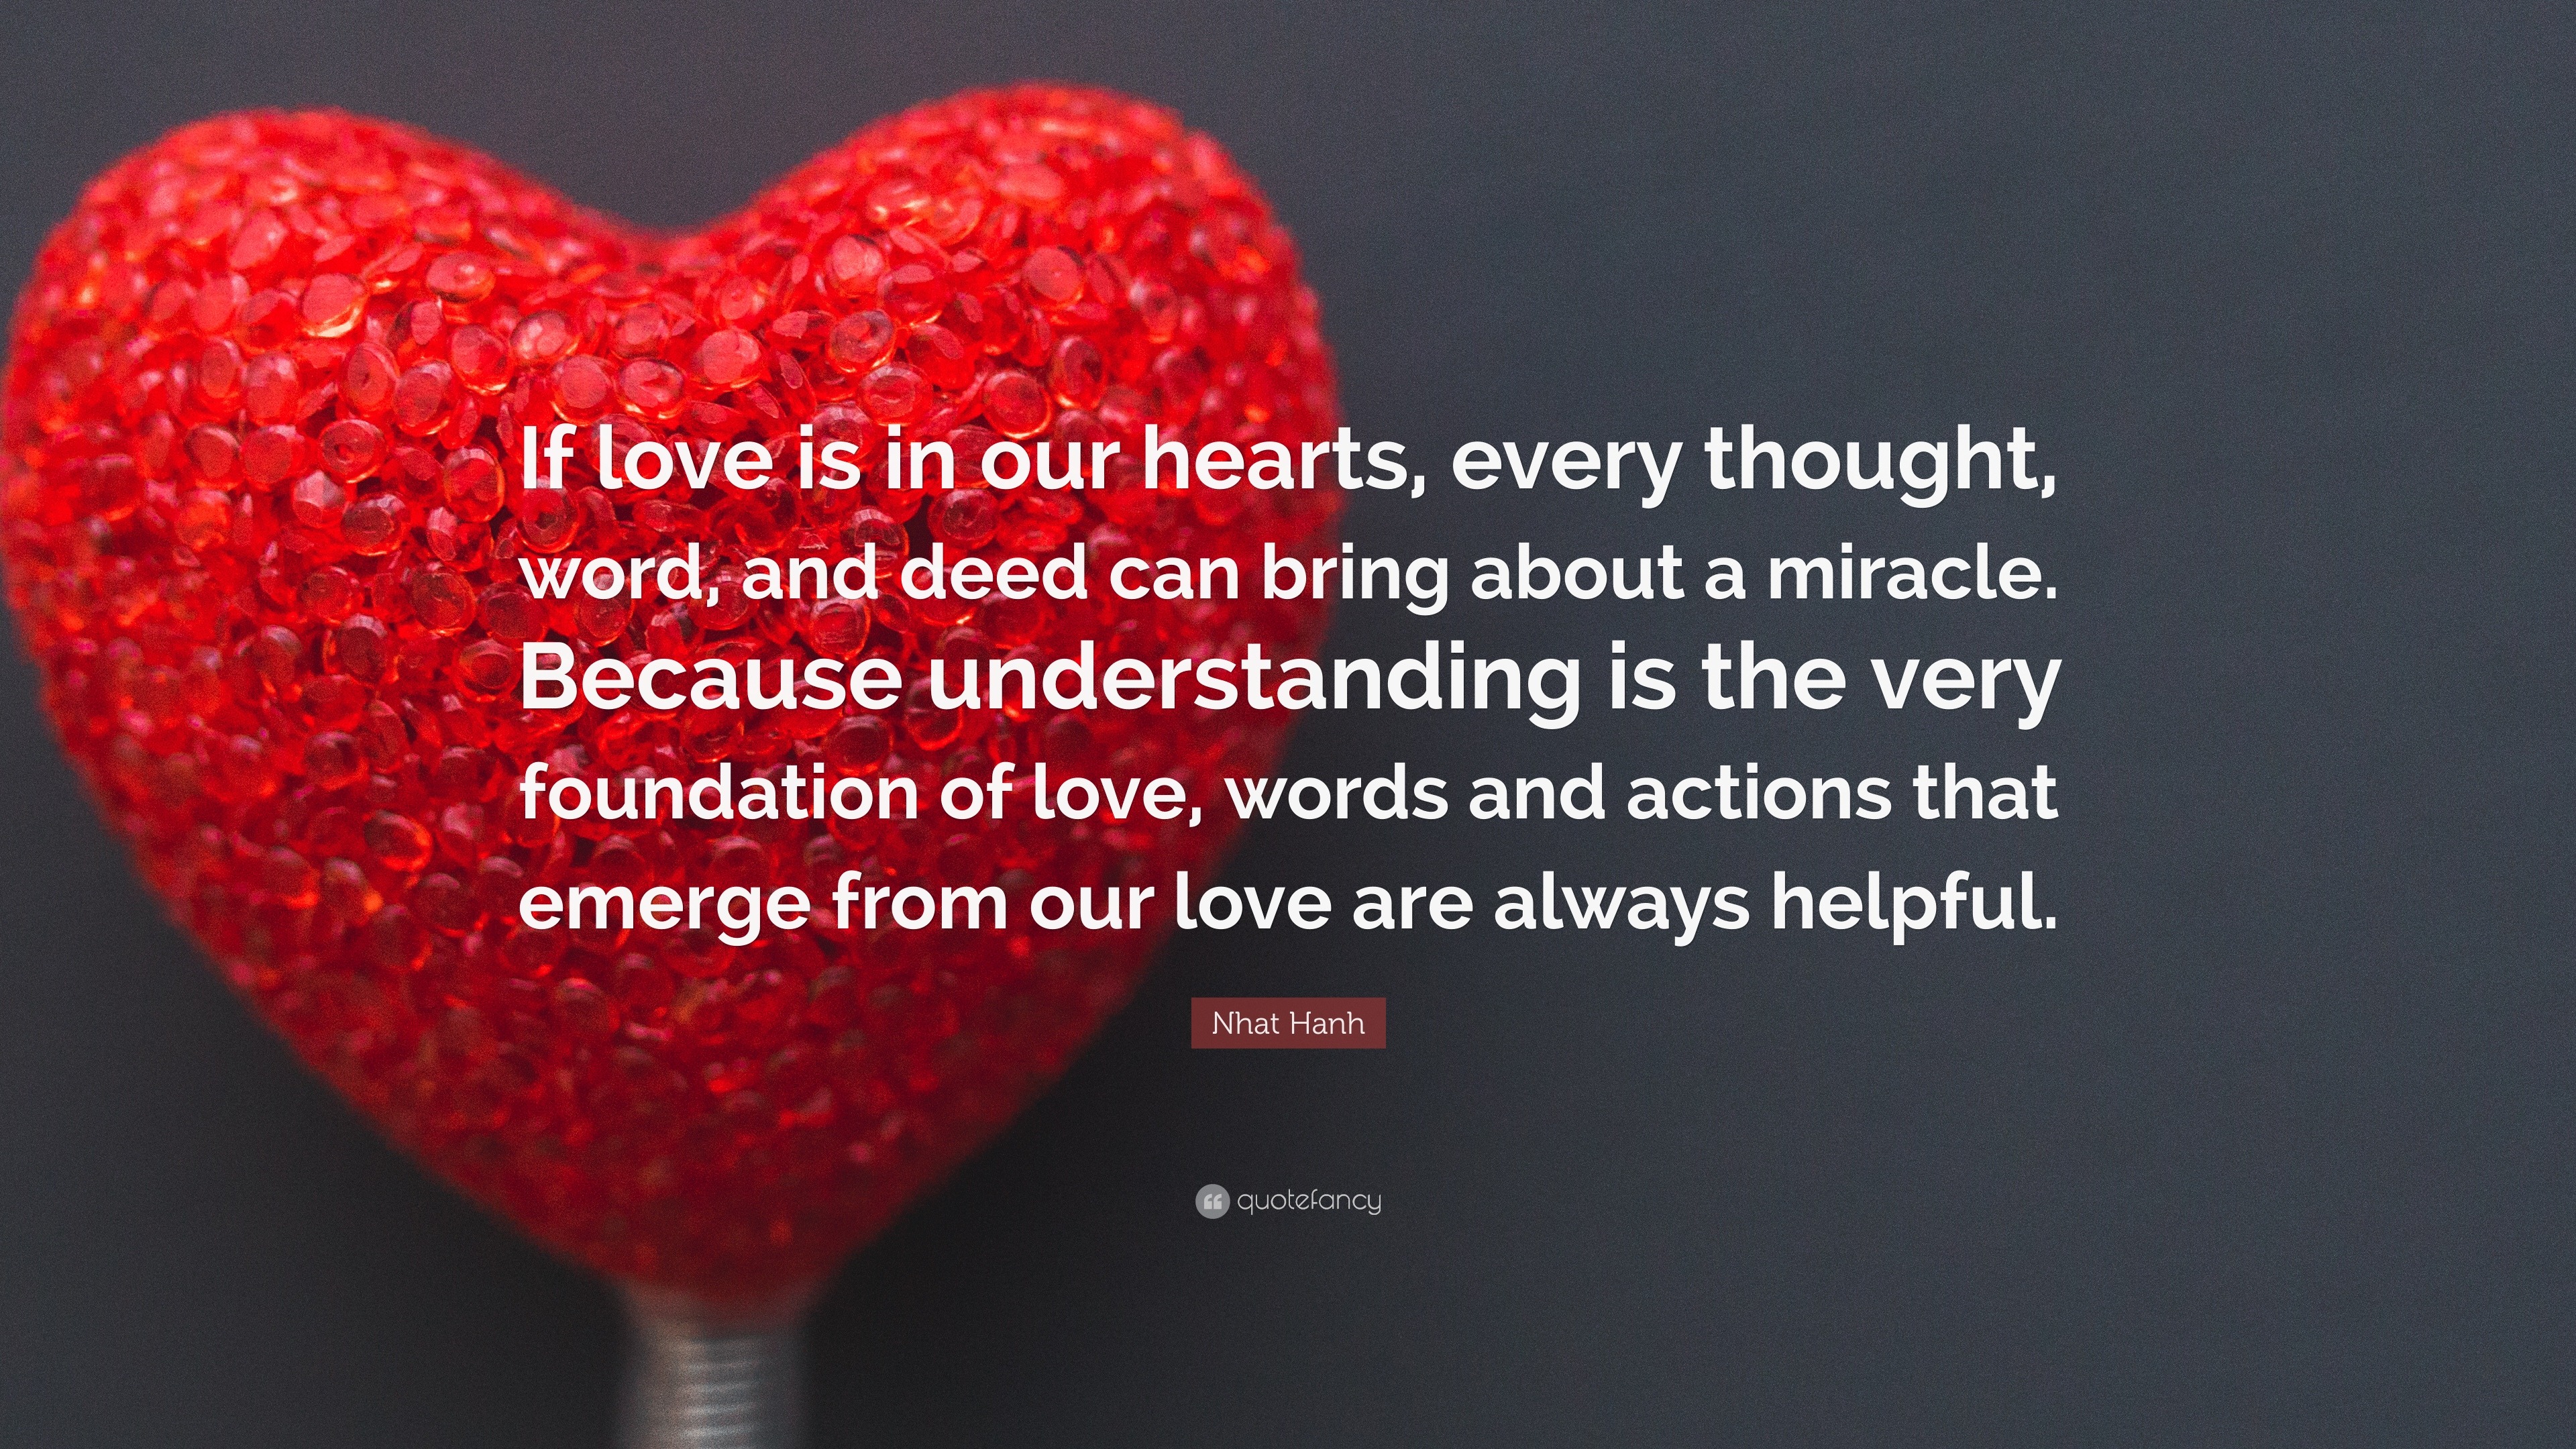 Nhat Hanh Quote “If love is in our hearts every thought word